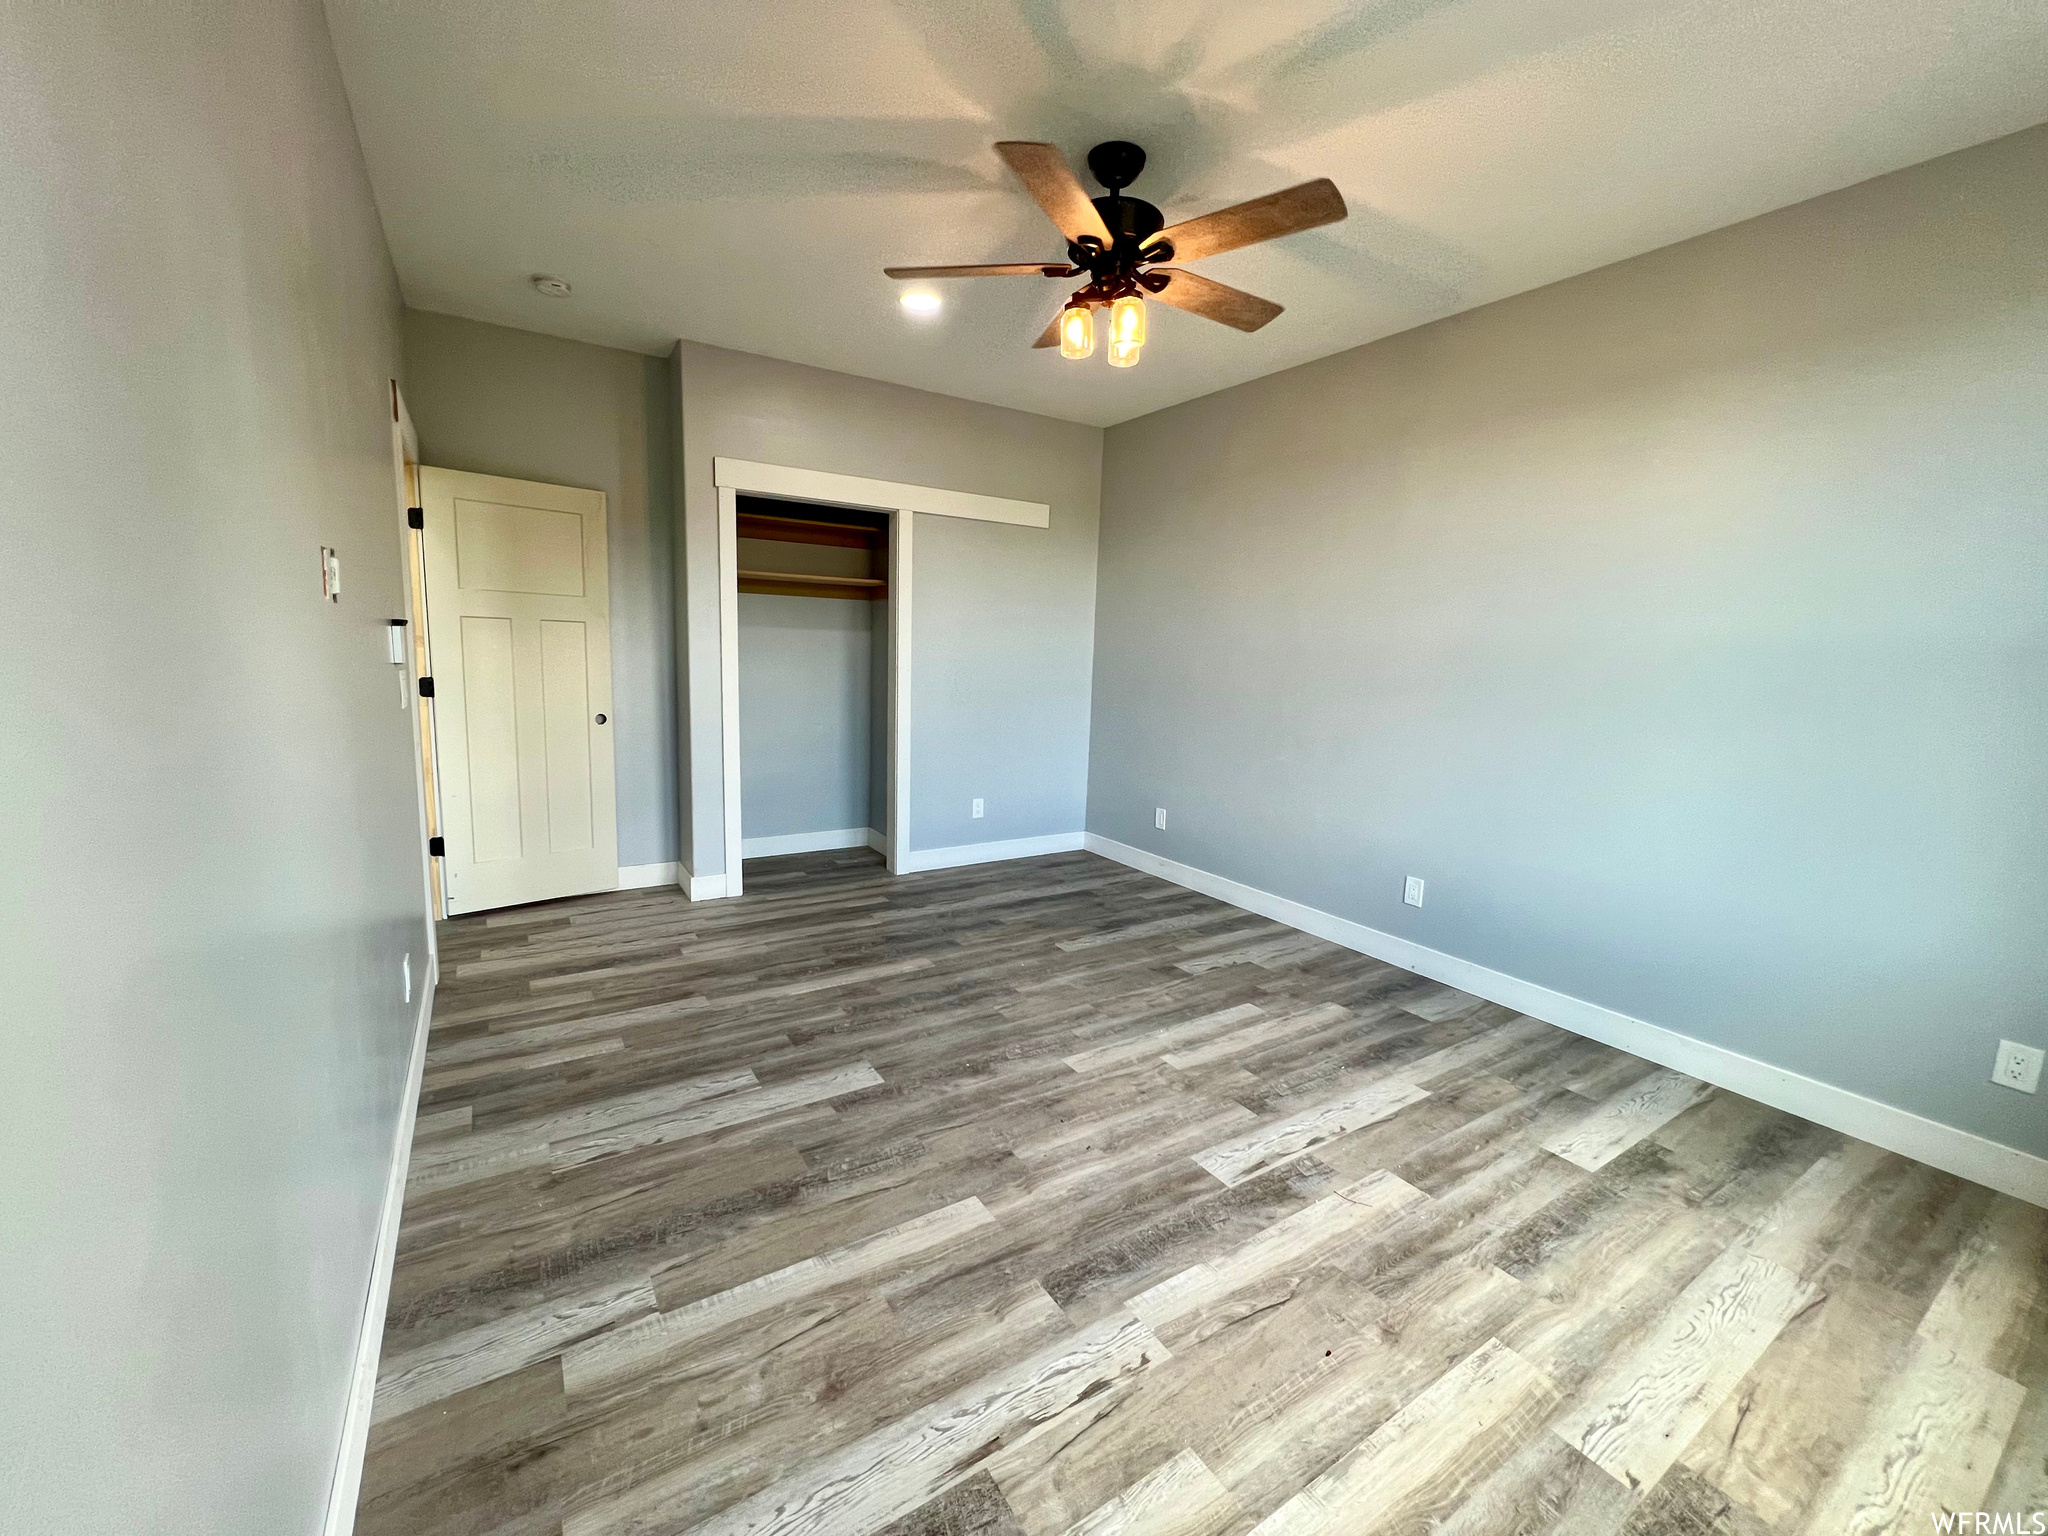 Hardwood floored bedroom featuring a ceiling fan